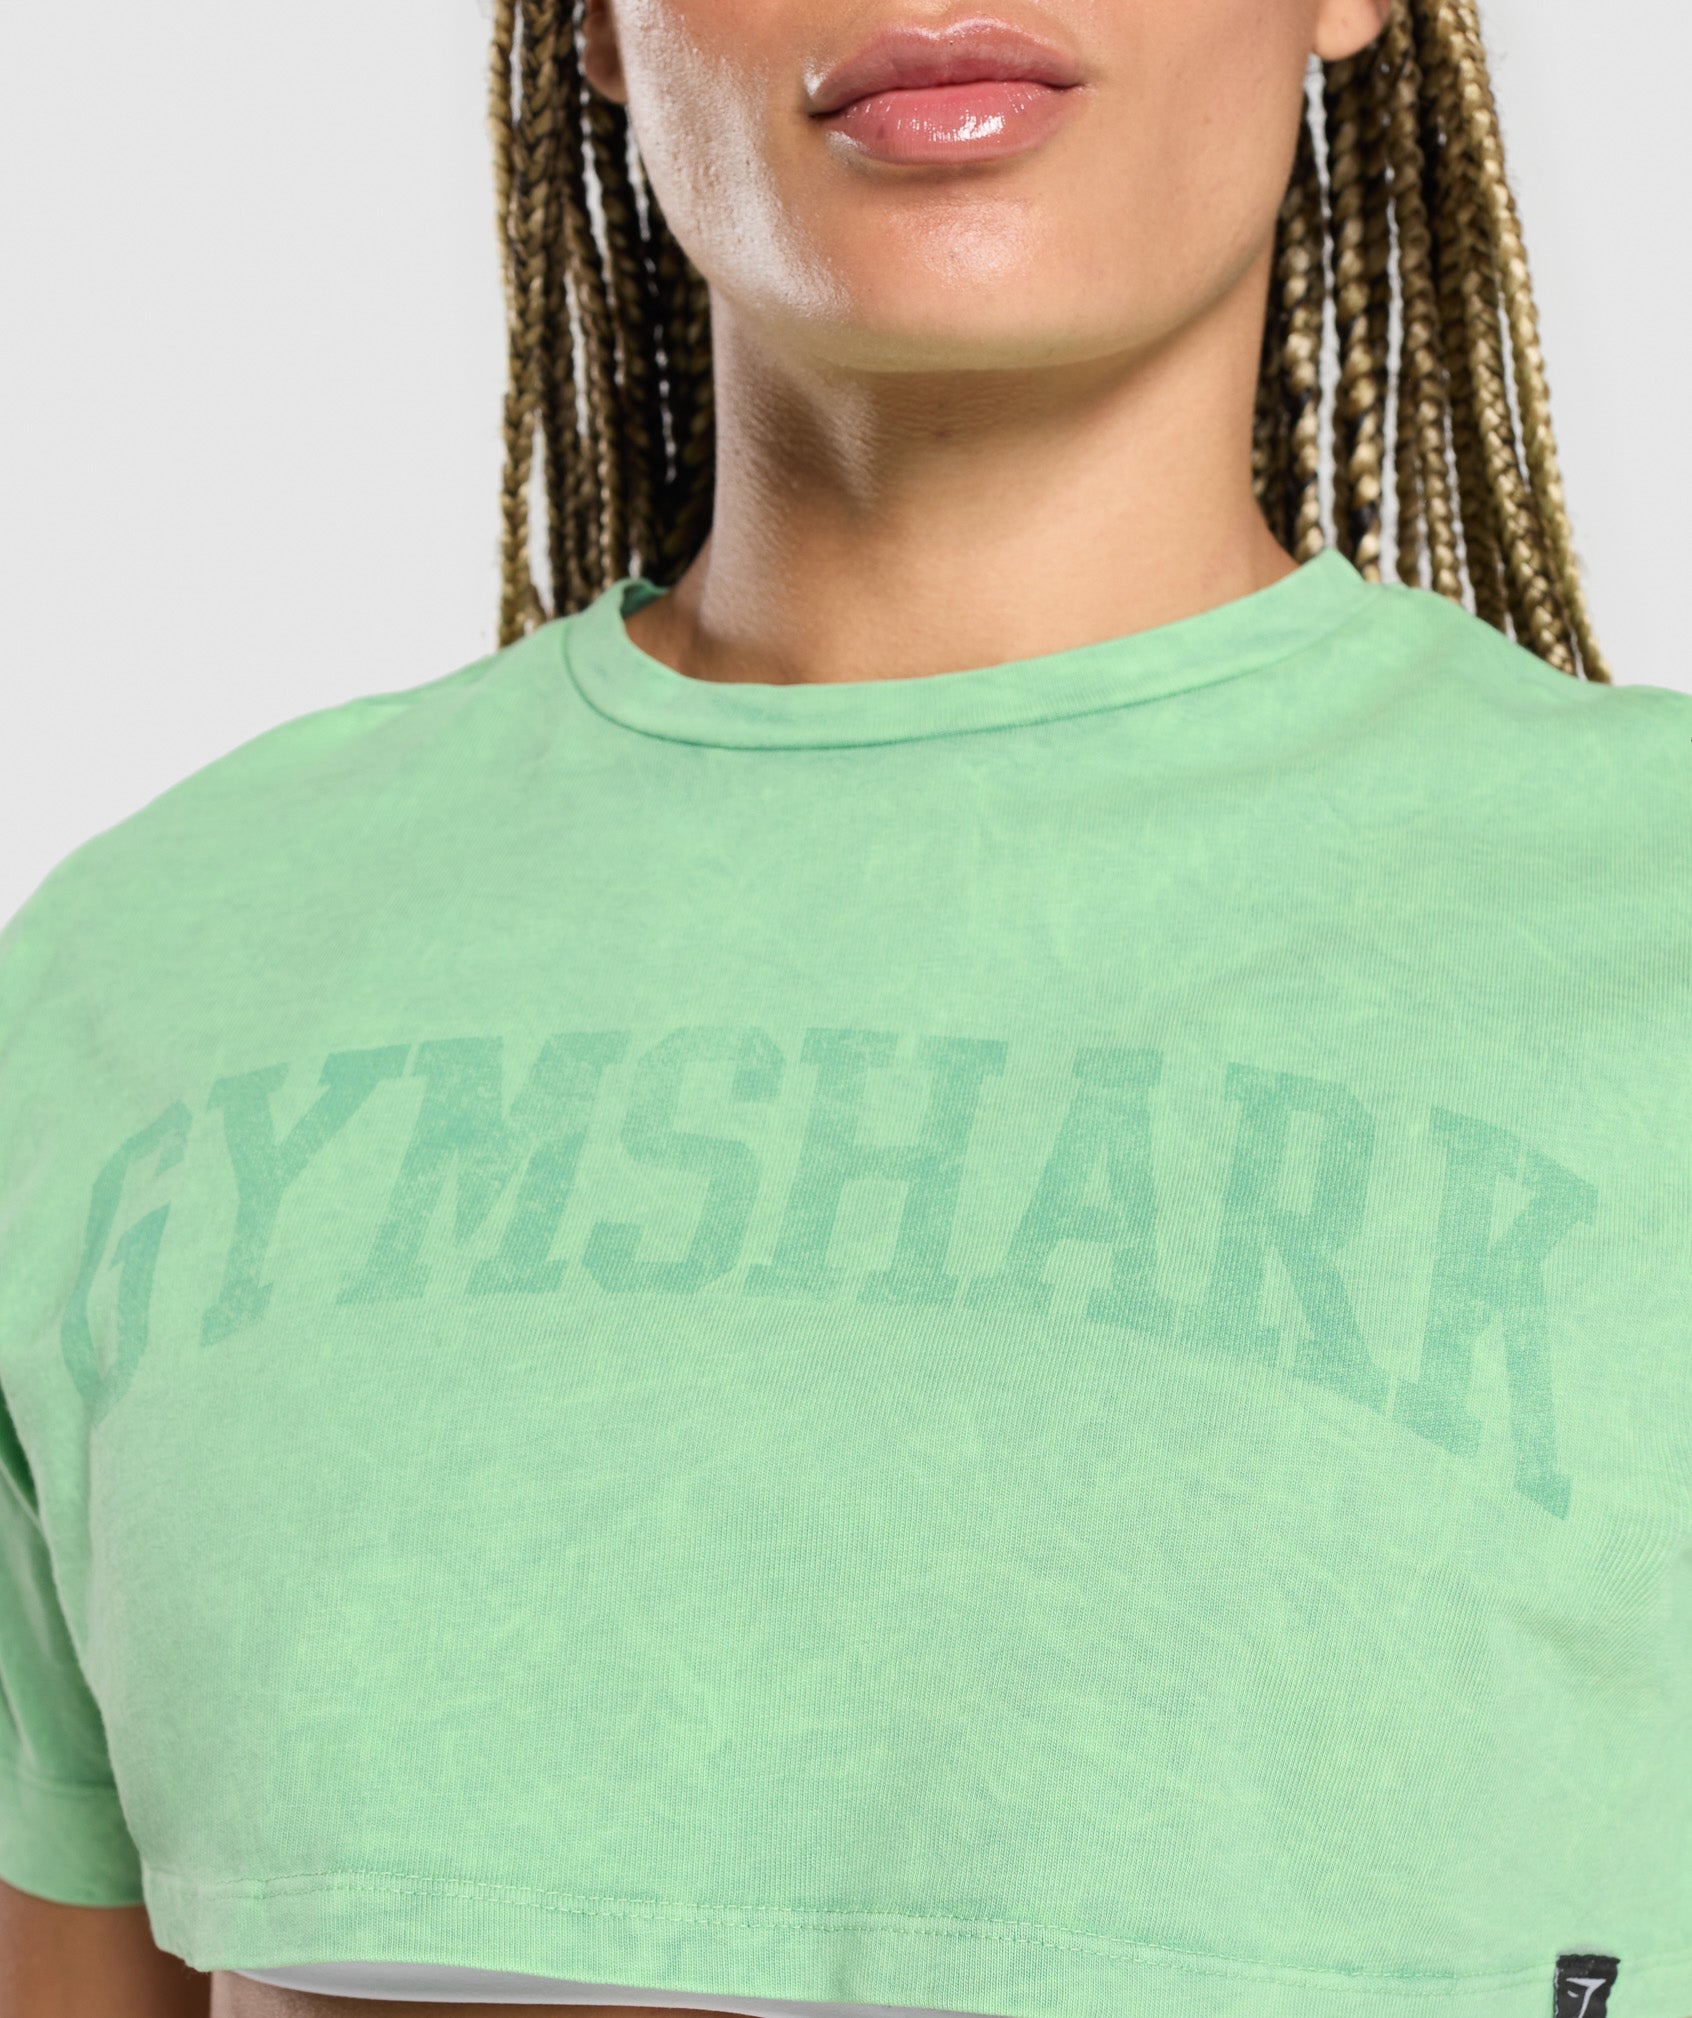 Collegiate Shadow Washed Crop Top in Lagoon Green - view 5